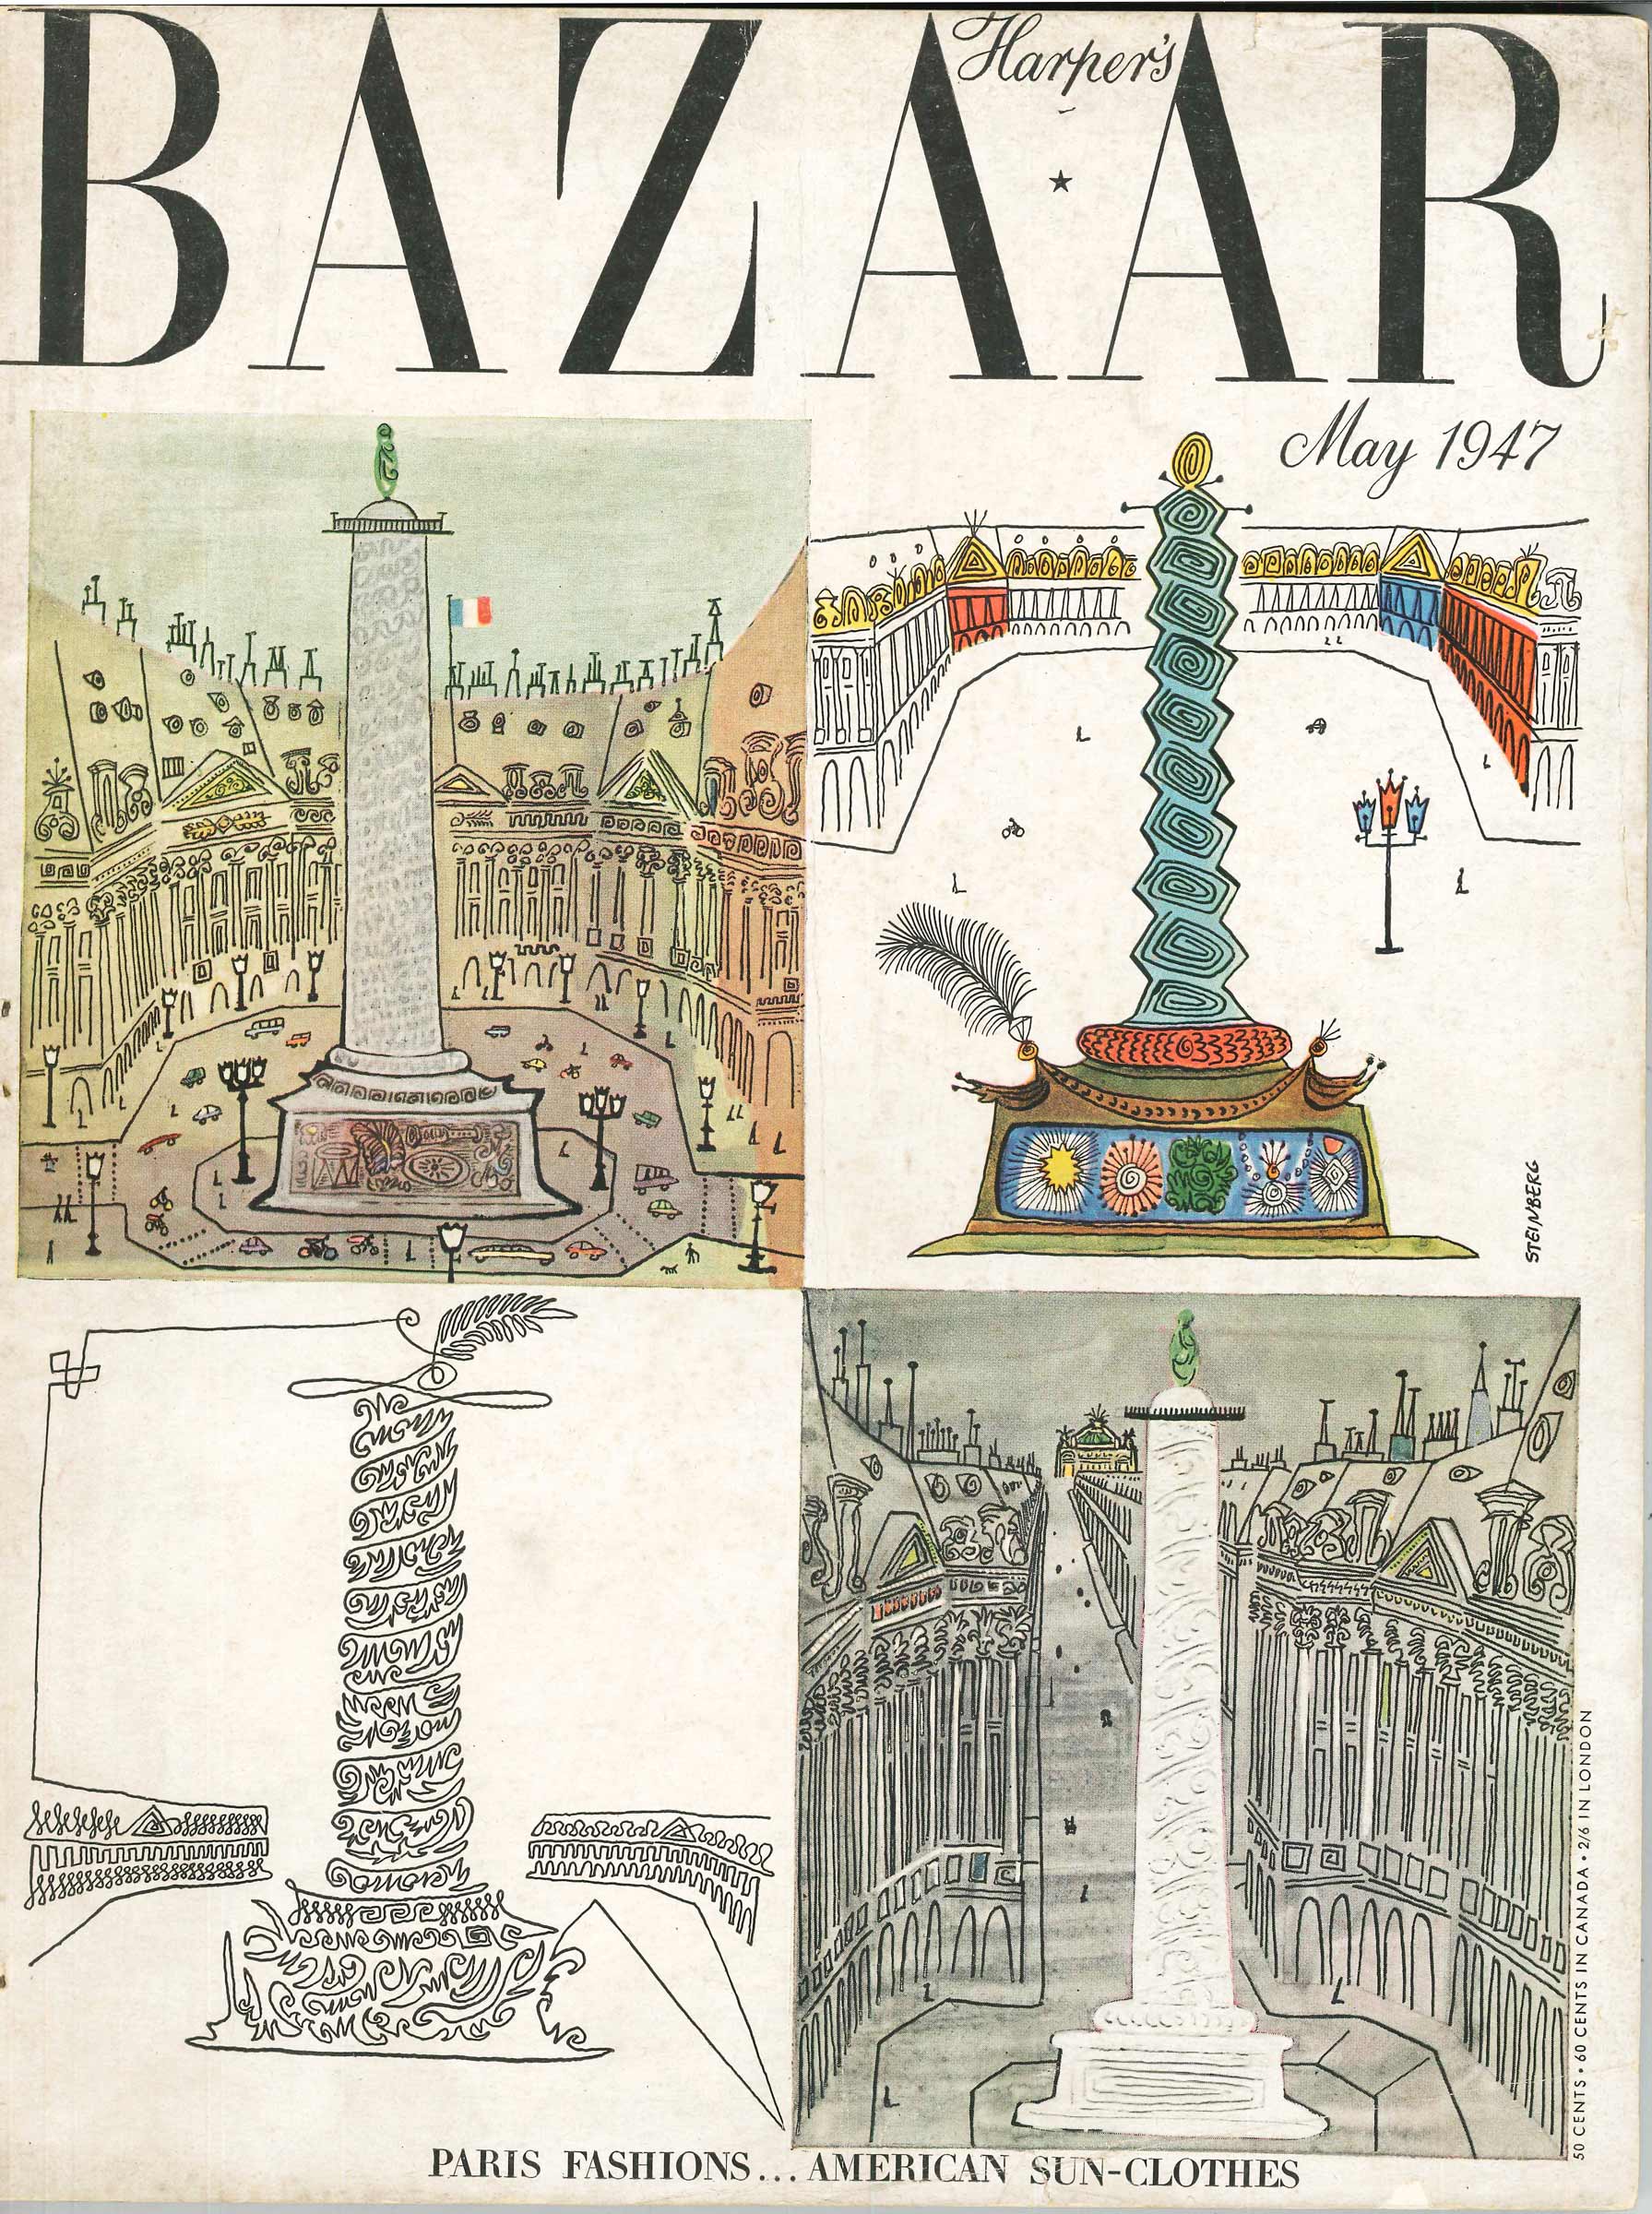 Cover of <em>Harper’s Bazaar</em>, May 1947. Editorial note: “To symbolize the new French fashions shown in this issue, Steinberg’s four versions of the famous column of the Place Vendôme in Paris.”